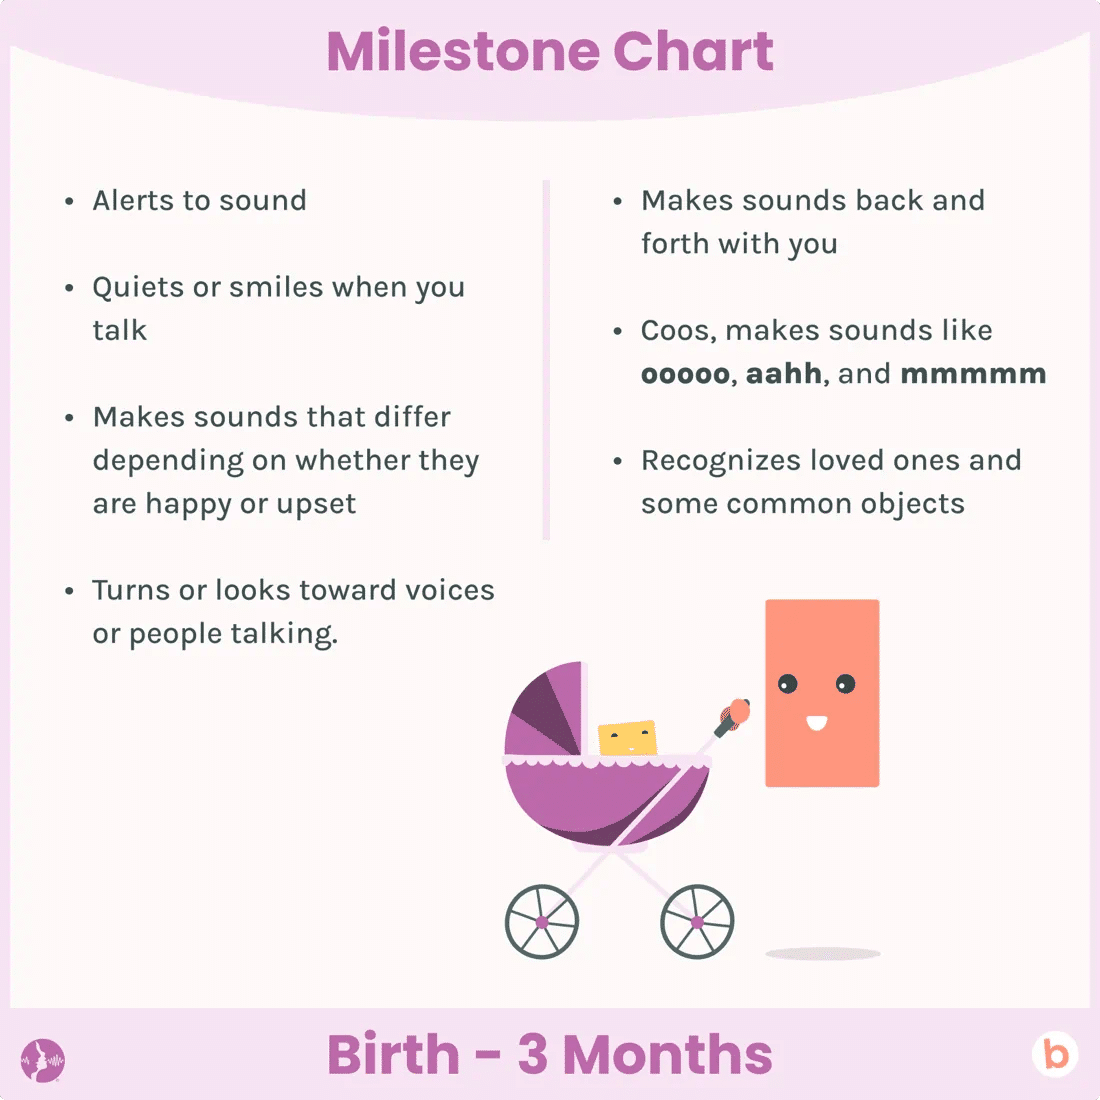 An updated speech language development milestone chart for babies age 0-3 months. The milestones are listed, and there is a graphic of a parent walking a baby in a stroller and they are looking at and responding to each other